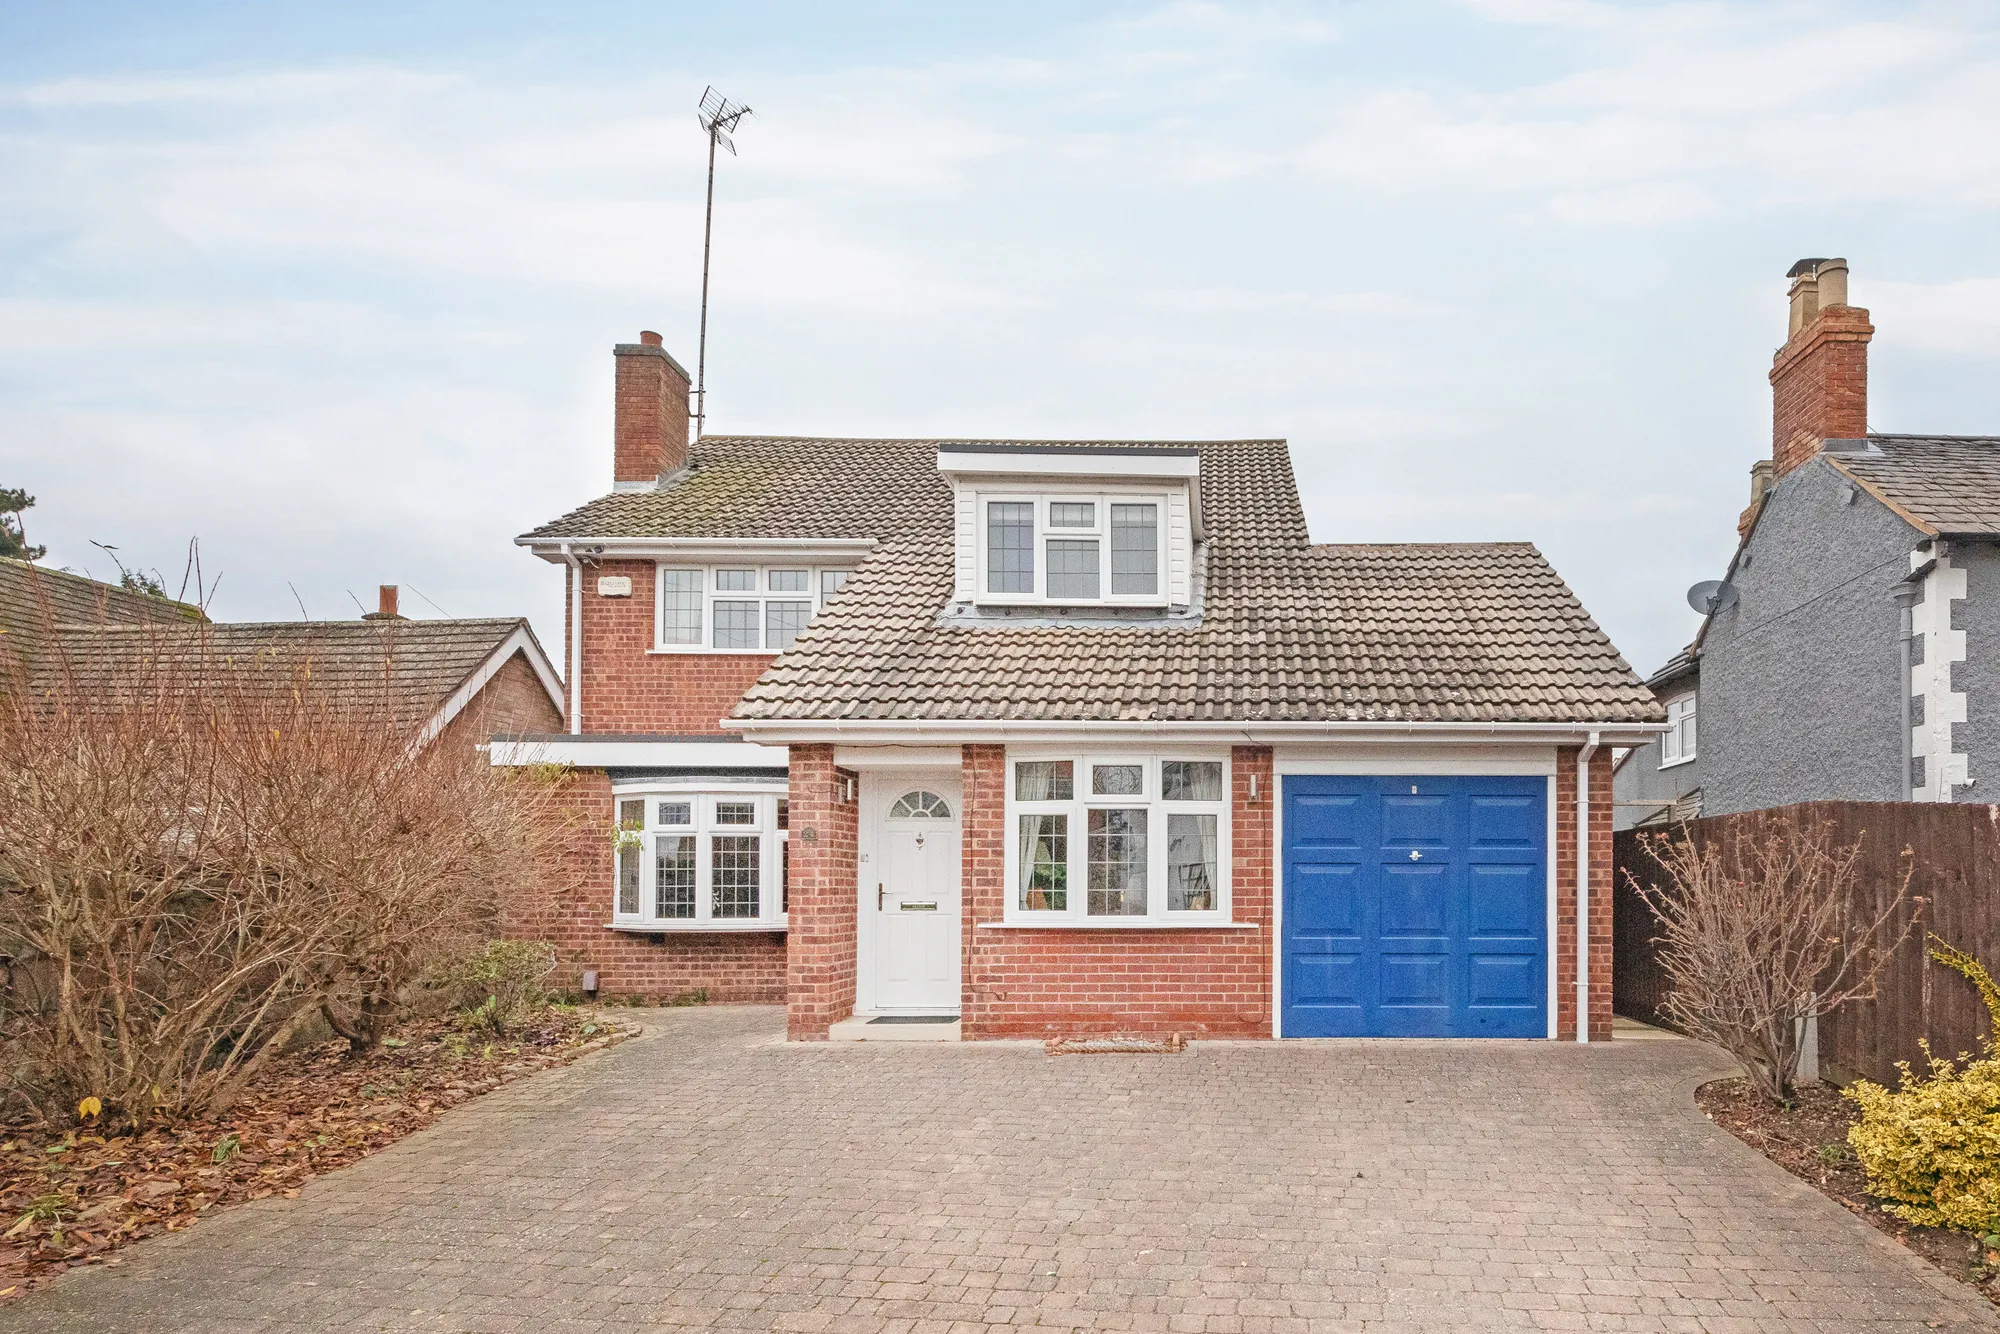 4 bed detached house for sale in Soar Road, Loughborough - Property Image 1